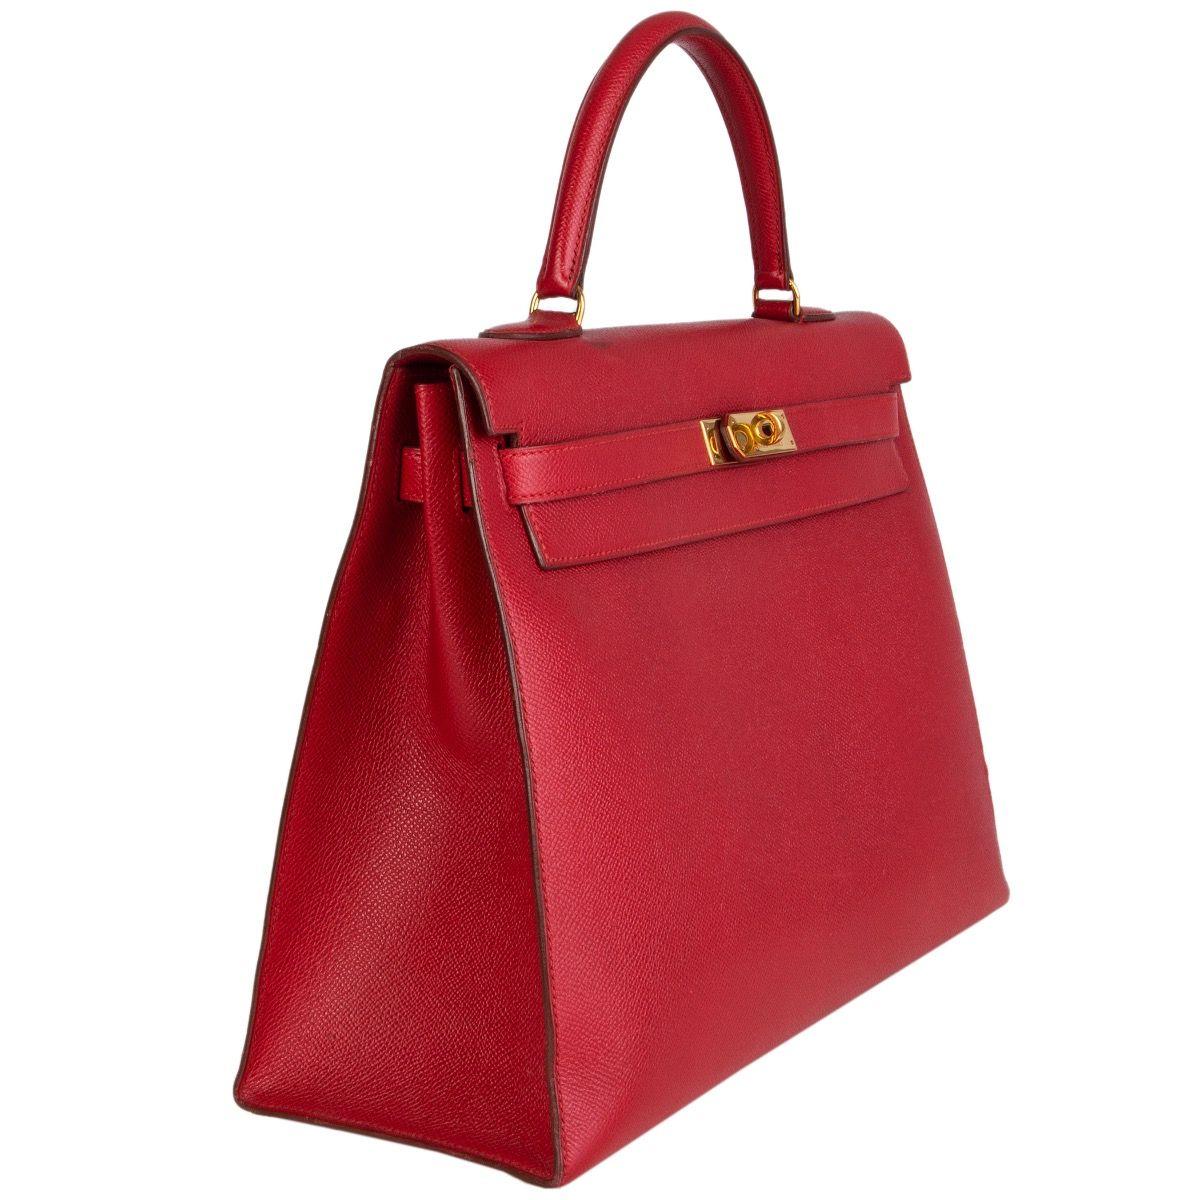 Hermès 'Kelly I 35' Sellier bag in Rouge Vif Veau Courchevel with gold-plated hardware. Removable shoulder strap. Closes with a turn-lock and straps on the front. Lined in Chevre (goat skin) with two open pockets against the front and a zipper